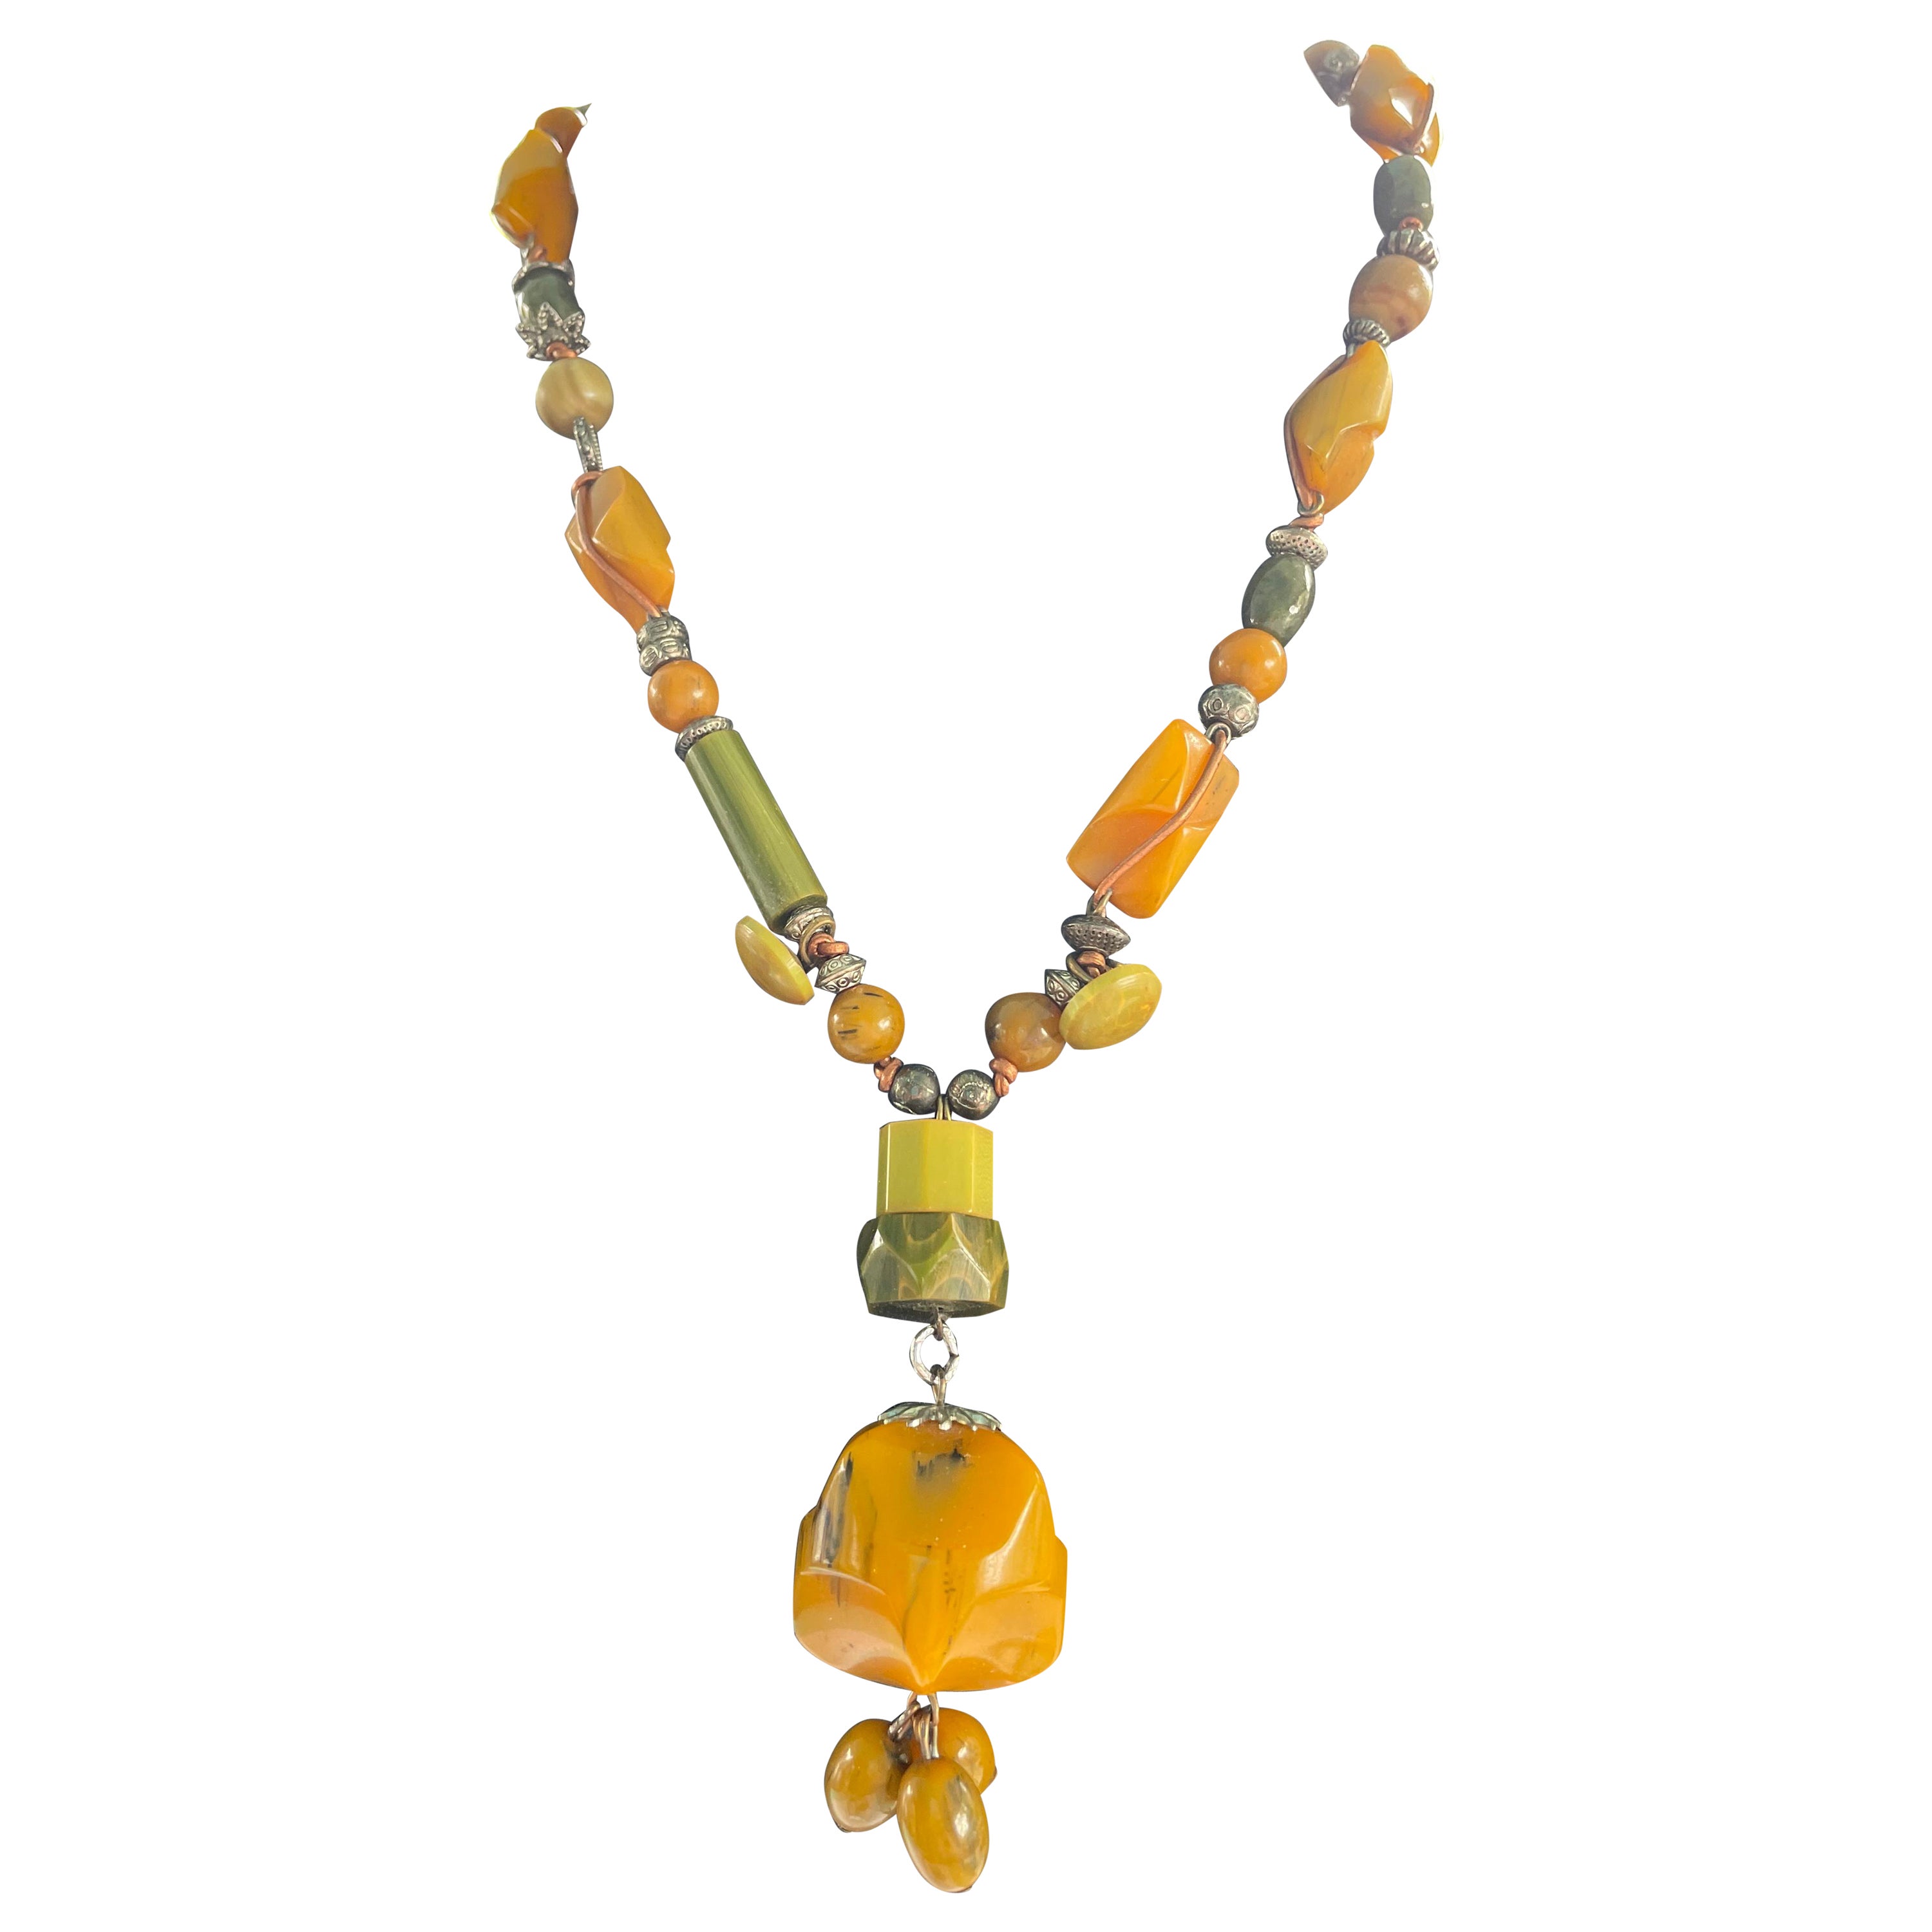 Lorraine’s Bijoux offers a handmade, one of a kind, necklace of Bakelite beads.